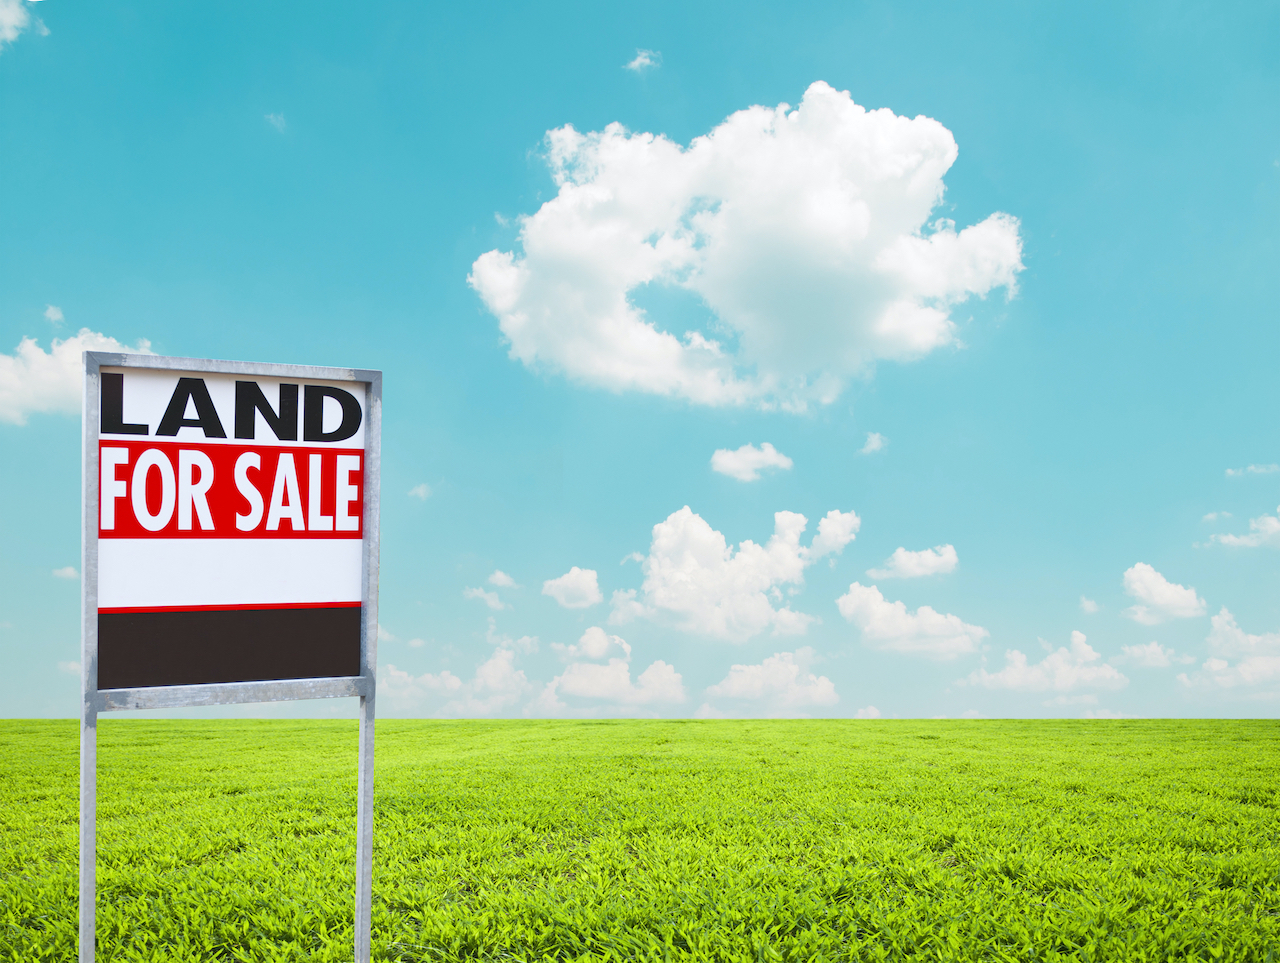 Land for Sale sign in field